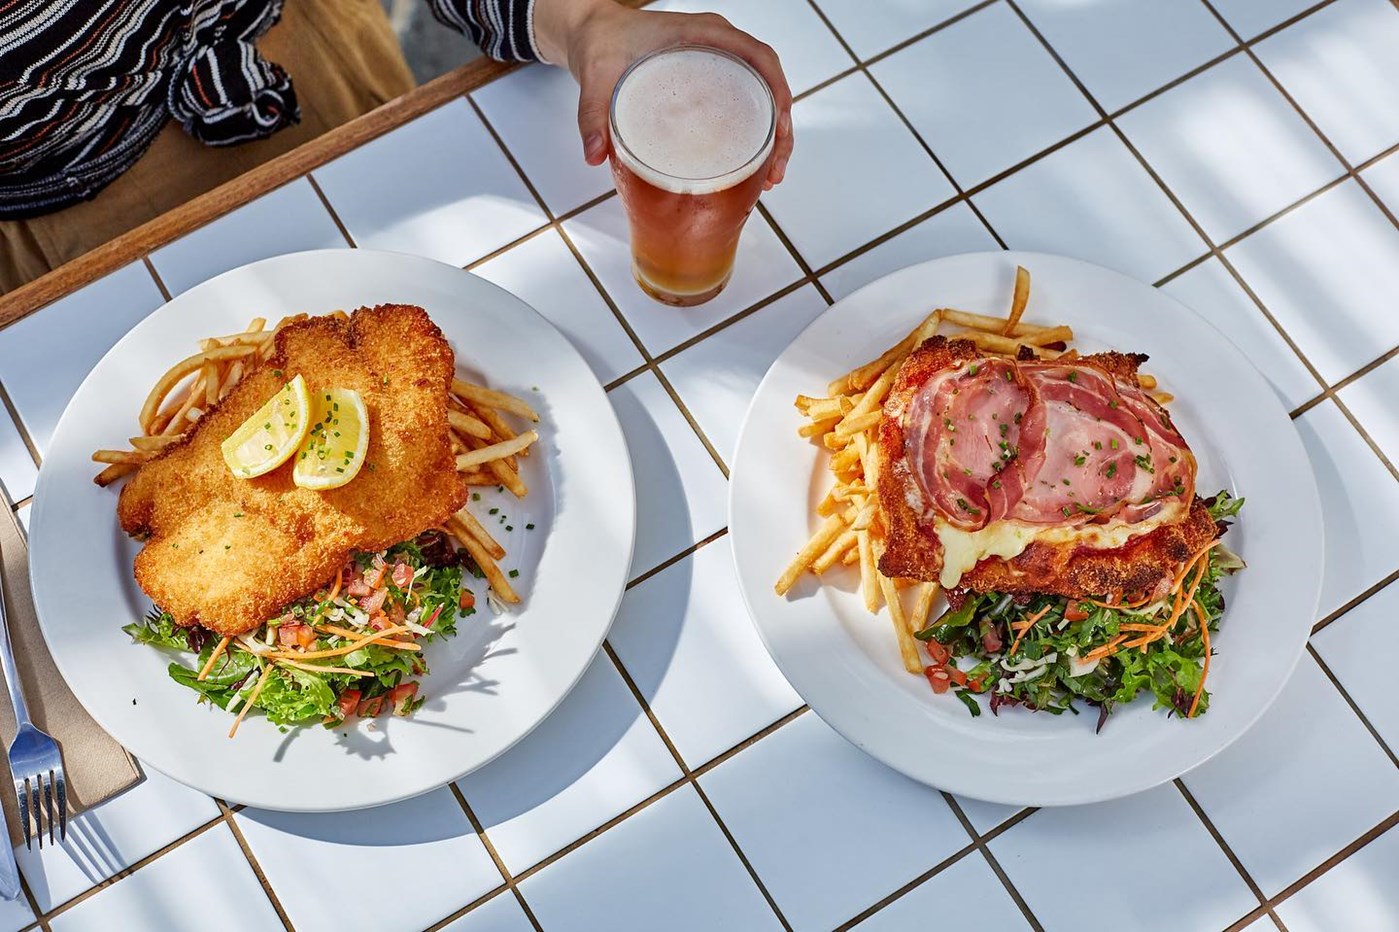 A Chicken schnitzel, chicken parmigiana and a beer against a tiled table at Beach Road Hotel 